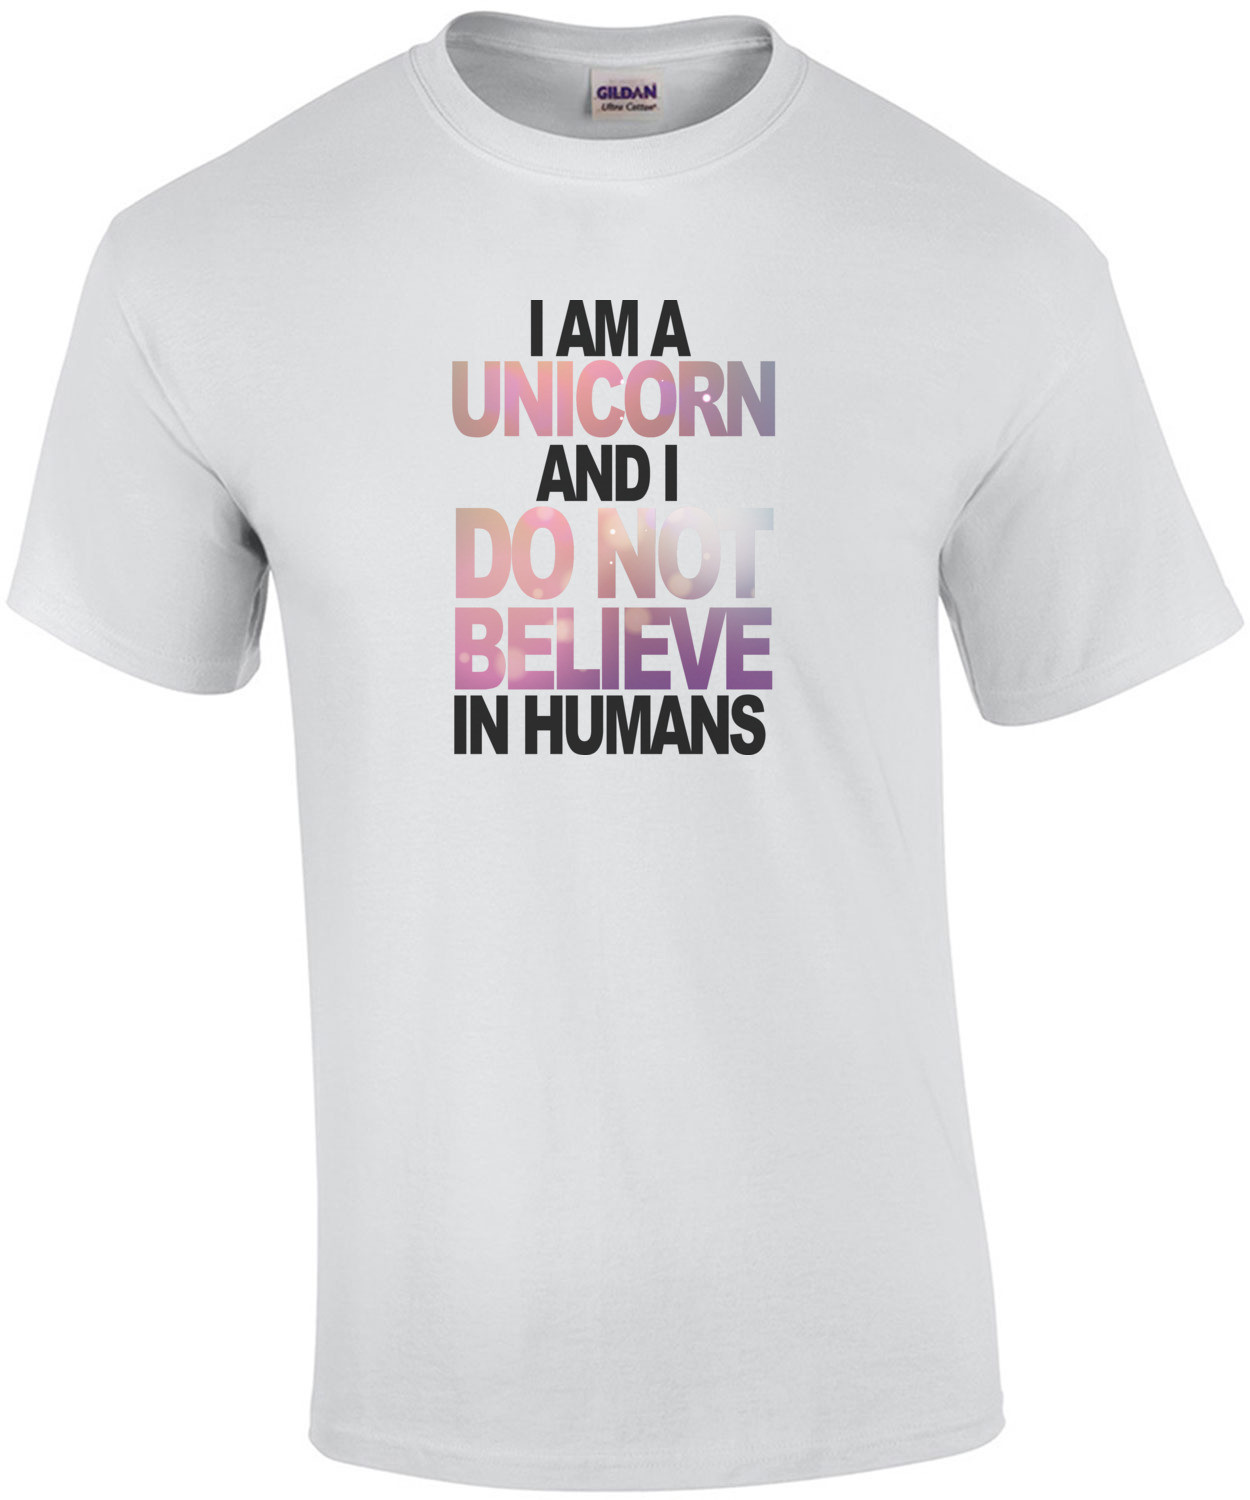 I am a unicorn and I do not believe in humans - Funny